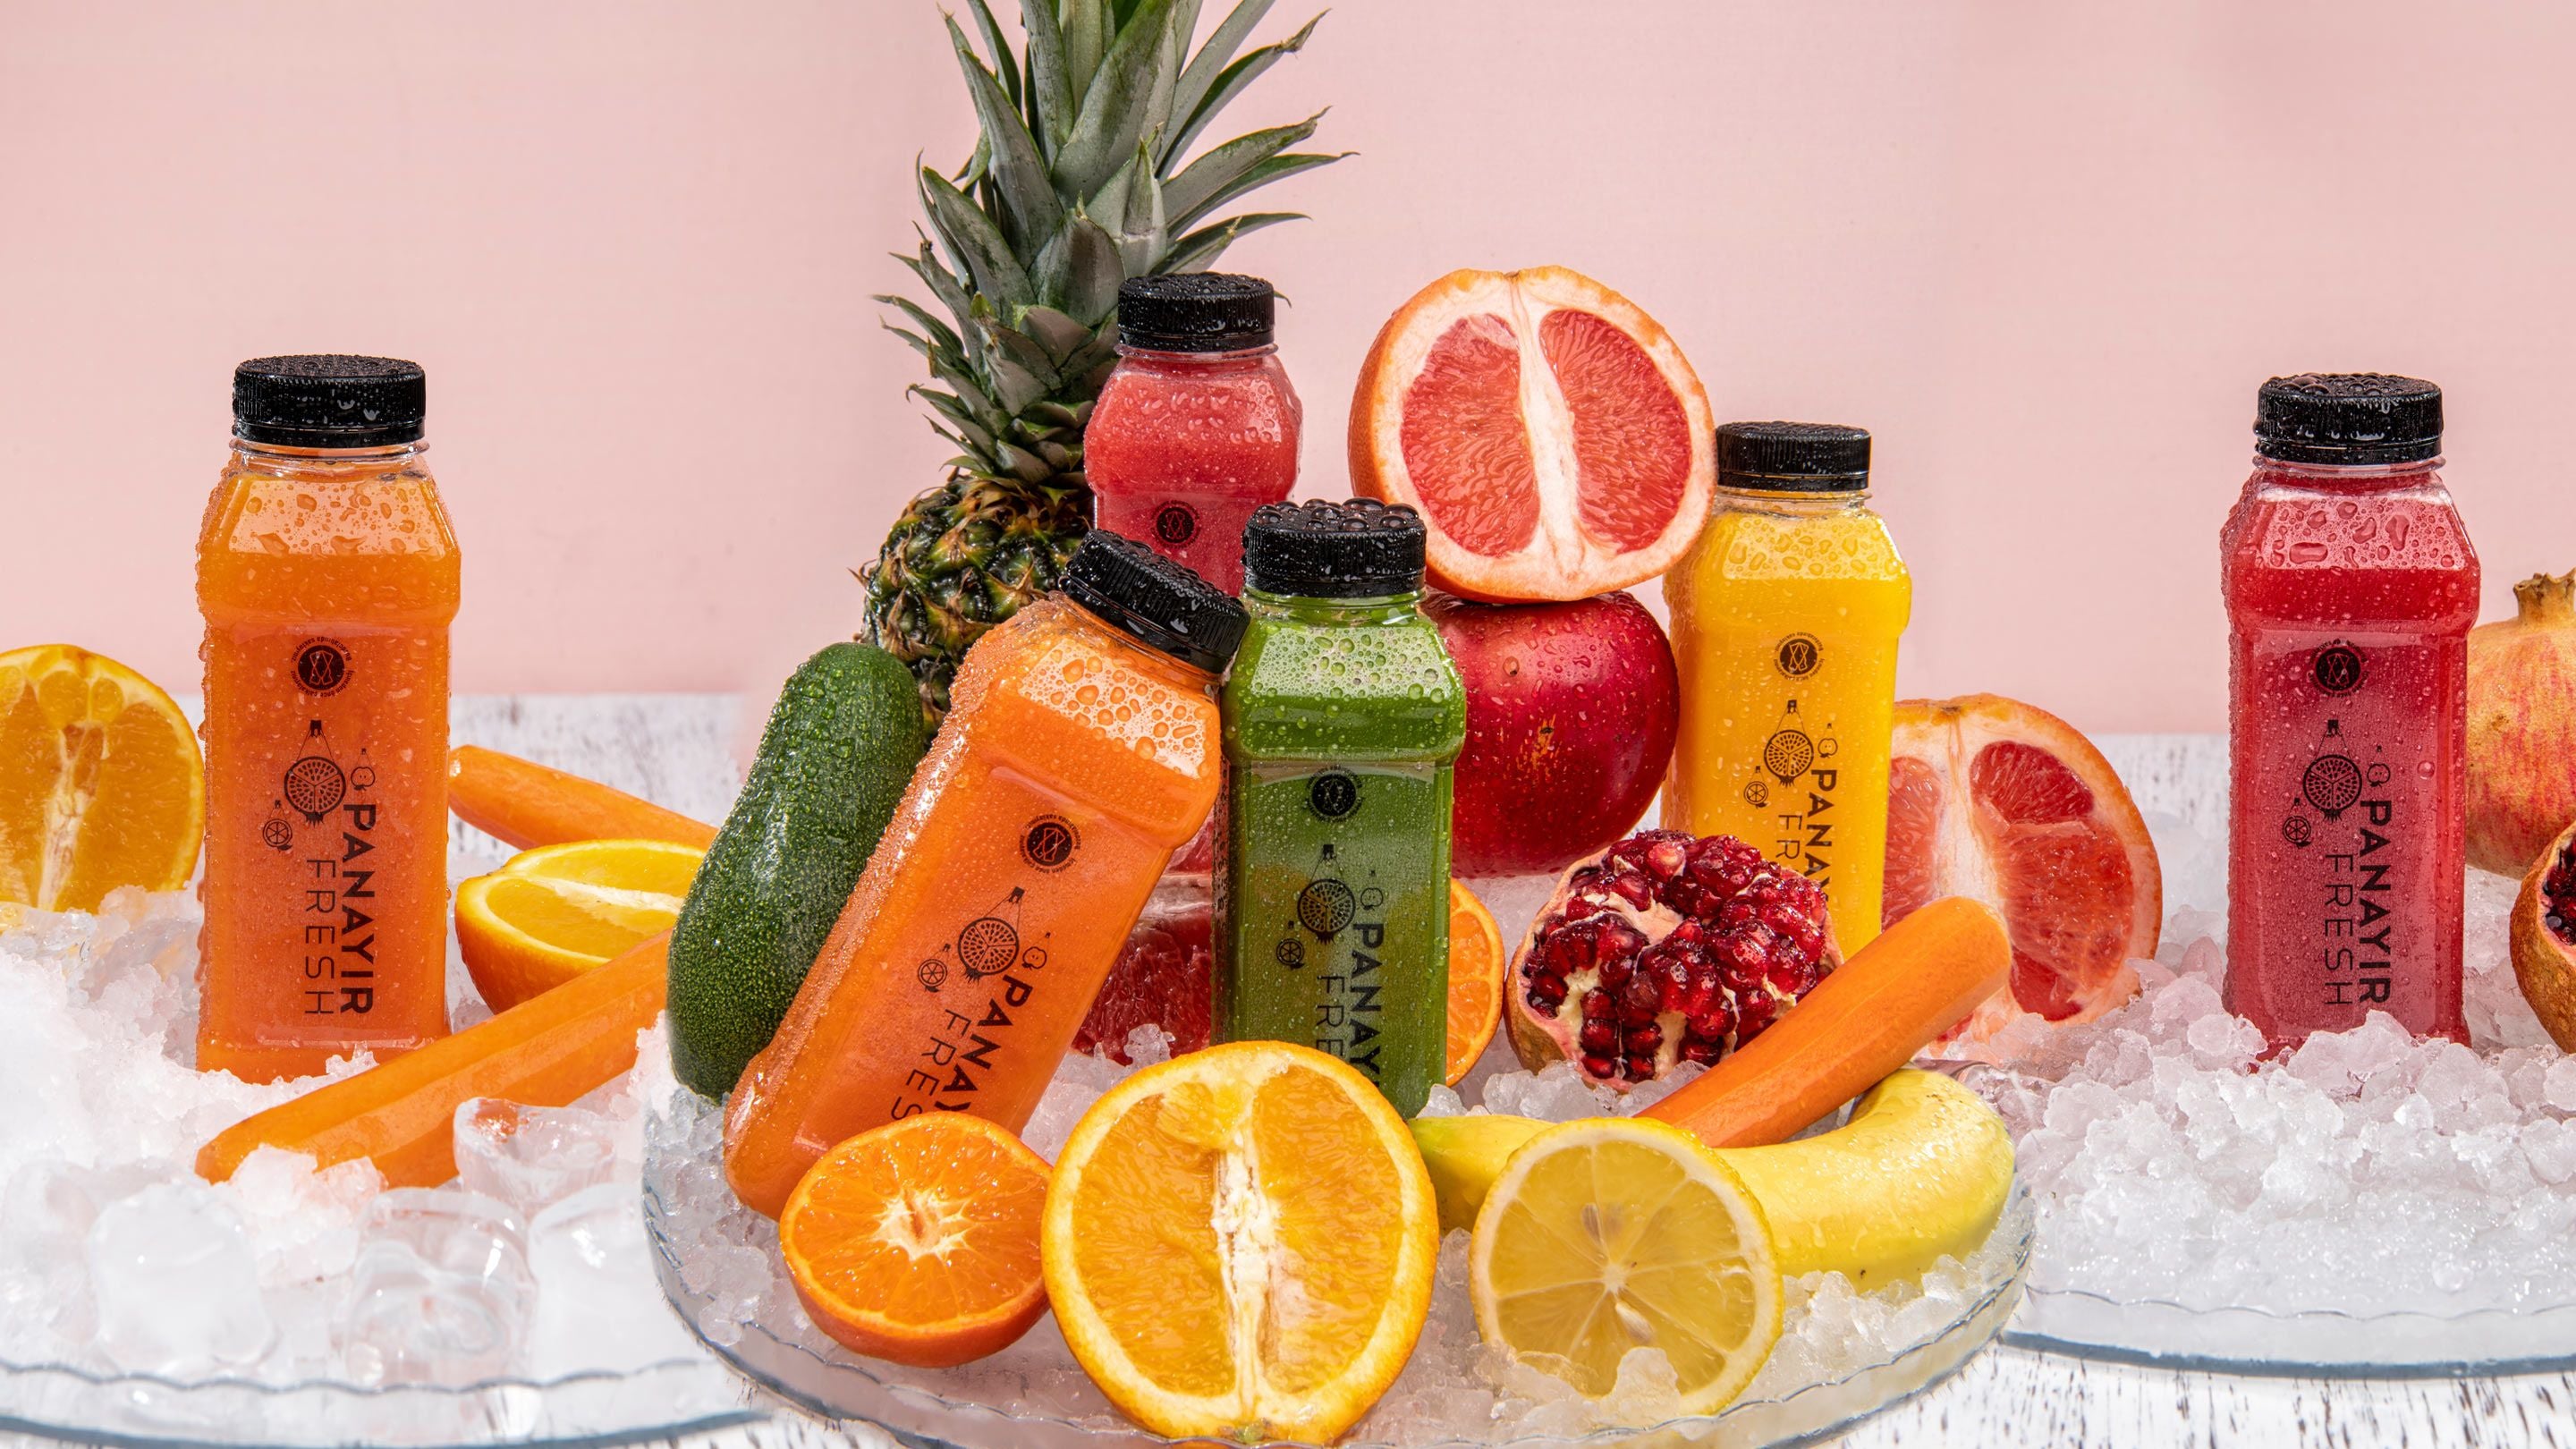 A Refreshing Start to Iftar: Break Your Fast with Freshly Squeezed Fruit Juices 